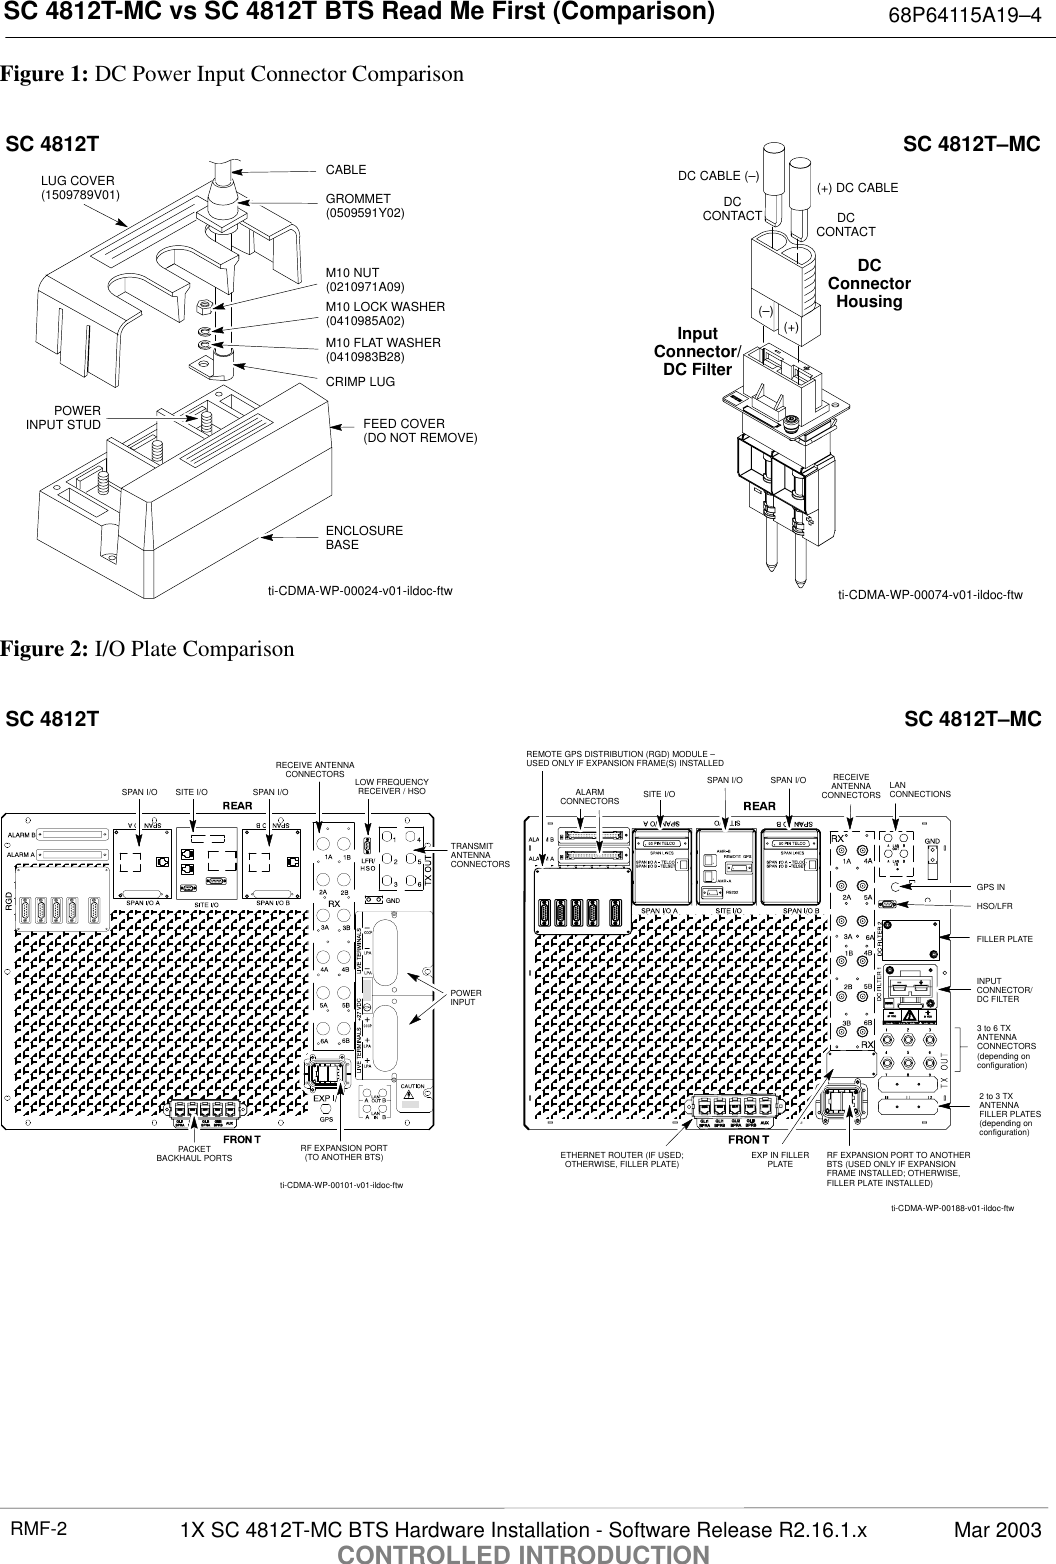 SC 4812T-MC vs SC 4812T BTS Read Me First (Comparison) 68P64115A19–4Mar 20031X SC 4812T-MC BTS Hardware Installation - Software Release R2.16.1.xCONTROLLED INTRODUCTIONRMF-2Figure 1: DC Power Input Connector ComparisonSC 4812T SC 4812T–MCCABLEGROMMET(0509591Y02)LUG COVER(1509789V01)M10 NUT(0210971A09)M10 LOCK WASHER(0410985A02)M10 FLAT WASHER(0410983B28)CRIMP LUGFEED COVER(DO NOT REMOVE)ENCLOSUREBASEPOWERINPUT STUDti-CDMA-WP-00024-v01-ildoc-ftwDCCONTACTInputConnector/DC Filterti-CDMA-WP-00074-v01-ildoc-ftwDCConnectorHousingDCCONTACT(+) DC CABLEDC CABLE (–)(–)(+)Figure 2: I/O Plate ComparisonETHERNET ROUTER (IF USED;OTHERWISE, FILLER PLATE) EXP IN FILLERPLATE RF EXPANSION PORT TO ANOTHERBTS (USED ONLY IF EXPANSIONFRAME INSTALLED; OTHERWISE,FILLER PLATE INSTALLED)ti-CDMA-WP-00188-v01-ildoc-ftwSPAN I/OSITE I/OALARMCONNECTORSLANCONNECTIONSGPS INHSO/LFRFILLER PLATERECEIVEANTENNACONNECTORSINPUTCONNECTOR/DC FILTERSPAN I/OREMOTE GPS DISTRIBUTION (RGD) MODULE –USED ONLY IF EXPANSION FRAME(S) INSTALLEDPACKETBACKHAUL PORTS RF EXPANSION PORT(TO ANOTHER BTS)LOW FREQUENCYRECEIVER / HSOSPAN I/OTRANSMITANTENNACONNECTORSPOWERINPUTRECEIVE ANTENNACONNECTORSSITE I/OSPAN I/Oti-CDMA-WP-00101-v01-ildoc-ftwSC 4812T SC 4812T–MC3 to 6 TXANTENNACONNECTORS(depending onconfiguration)2 to 3 TXANTENNAFILLER PLATES(depending onconfiguration)